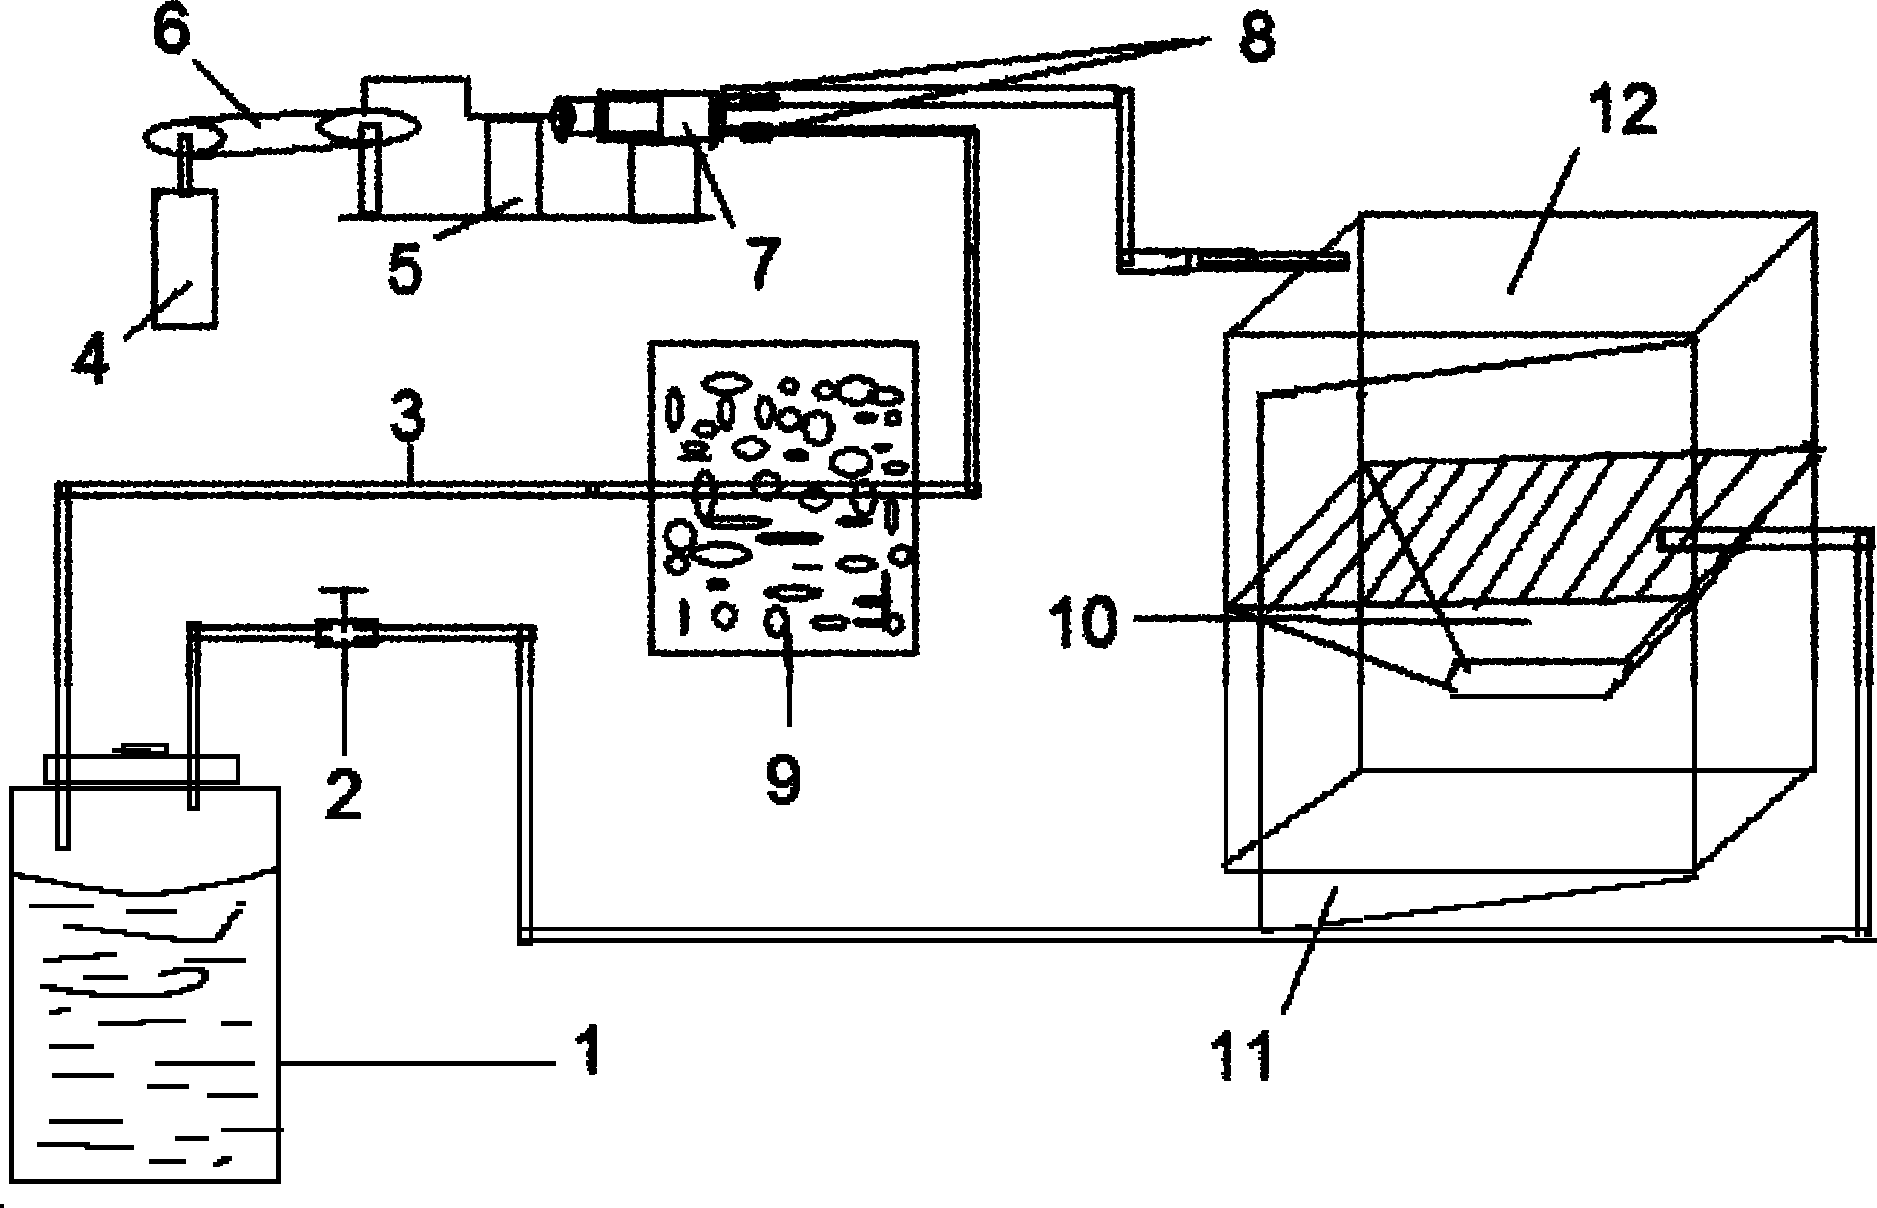 Anesthesia device for animal experiment